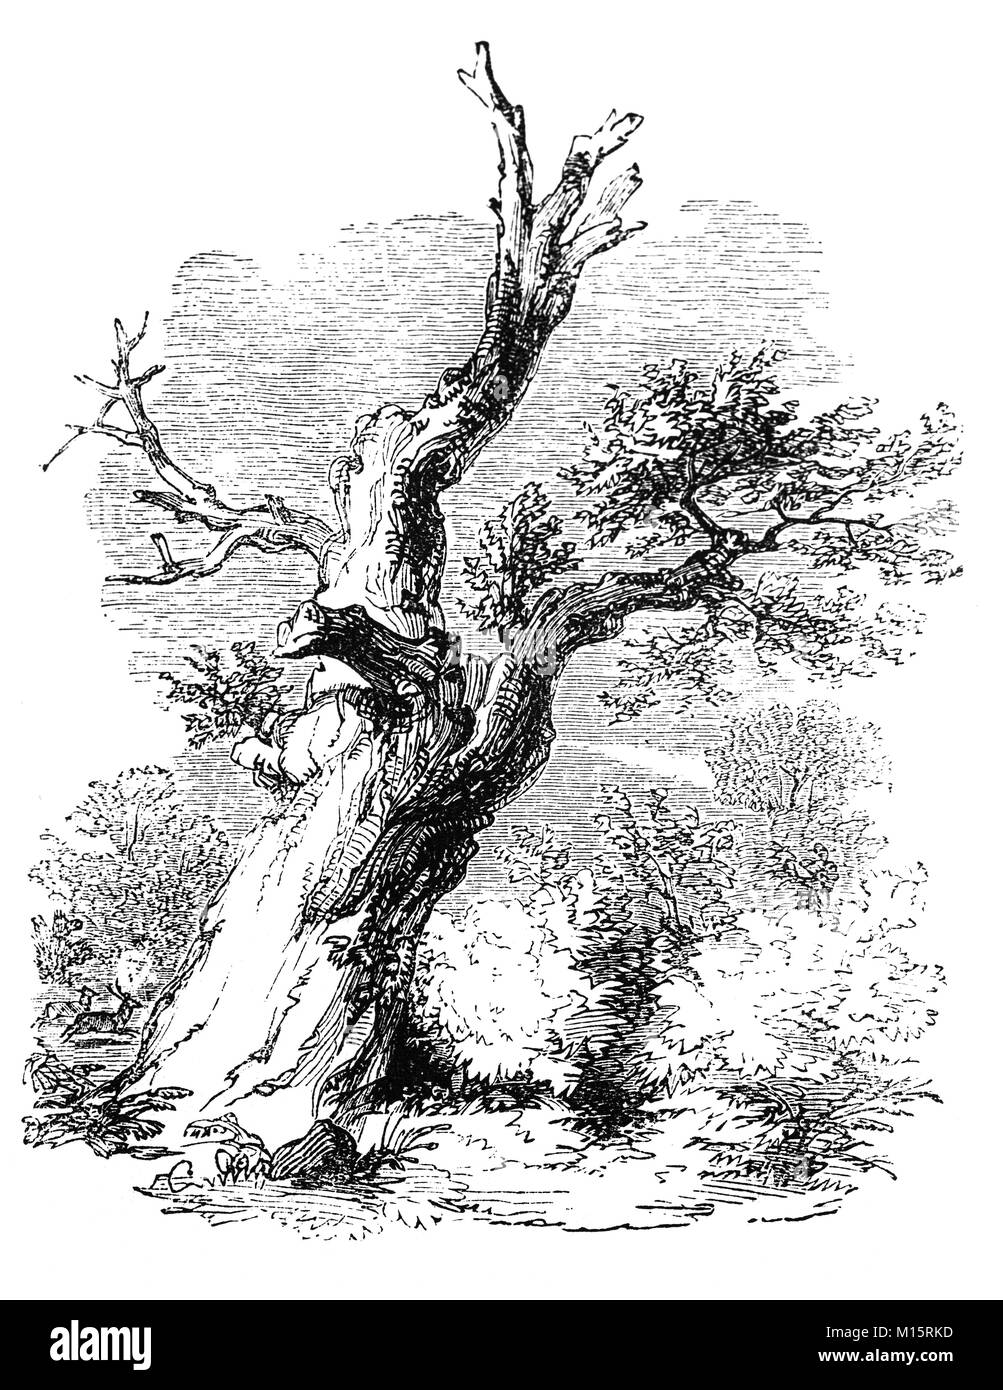 The Parliament Oak is thought to be c.1200 years old and probably the oldest tree in Sherwood Forest. It marked the Hell Dale Gate entrance to the deer park of Clipstone, a much favoured hunting place for Royalty who stayed at nearby King John’s Place. The tree acquired its name from the Parliaments which are said to have been held here. Legend has it that the Ancient Barons met King John here in order to present him with the details of the Magna Carter, later signed at Runnymede. Nottinghamshire, England. Stock Photo